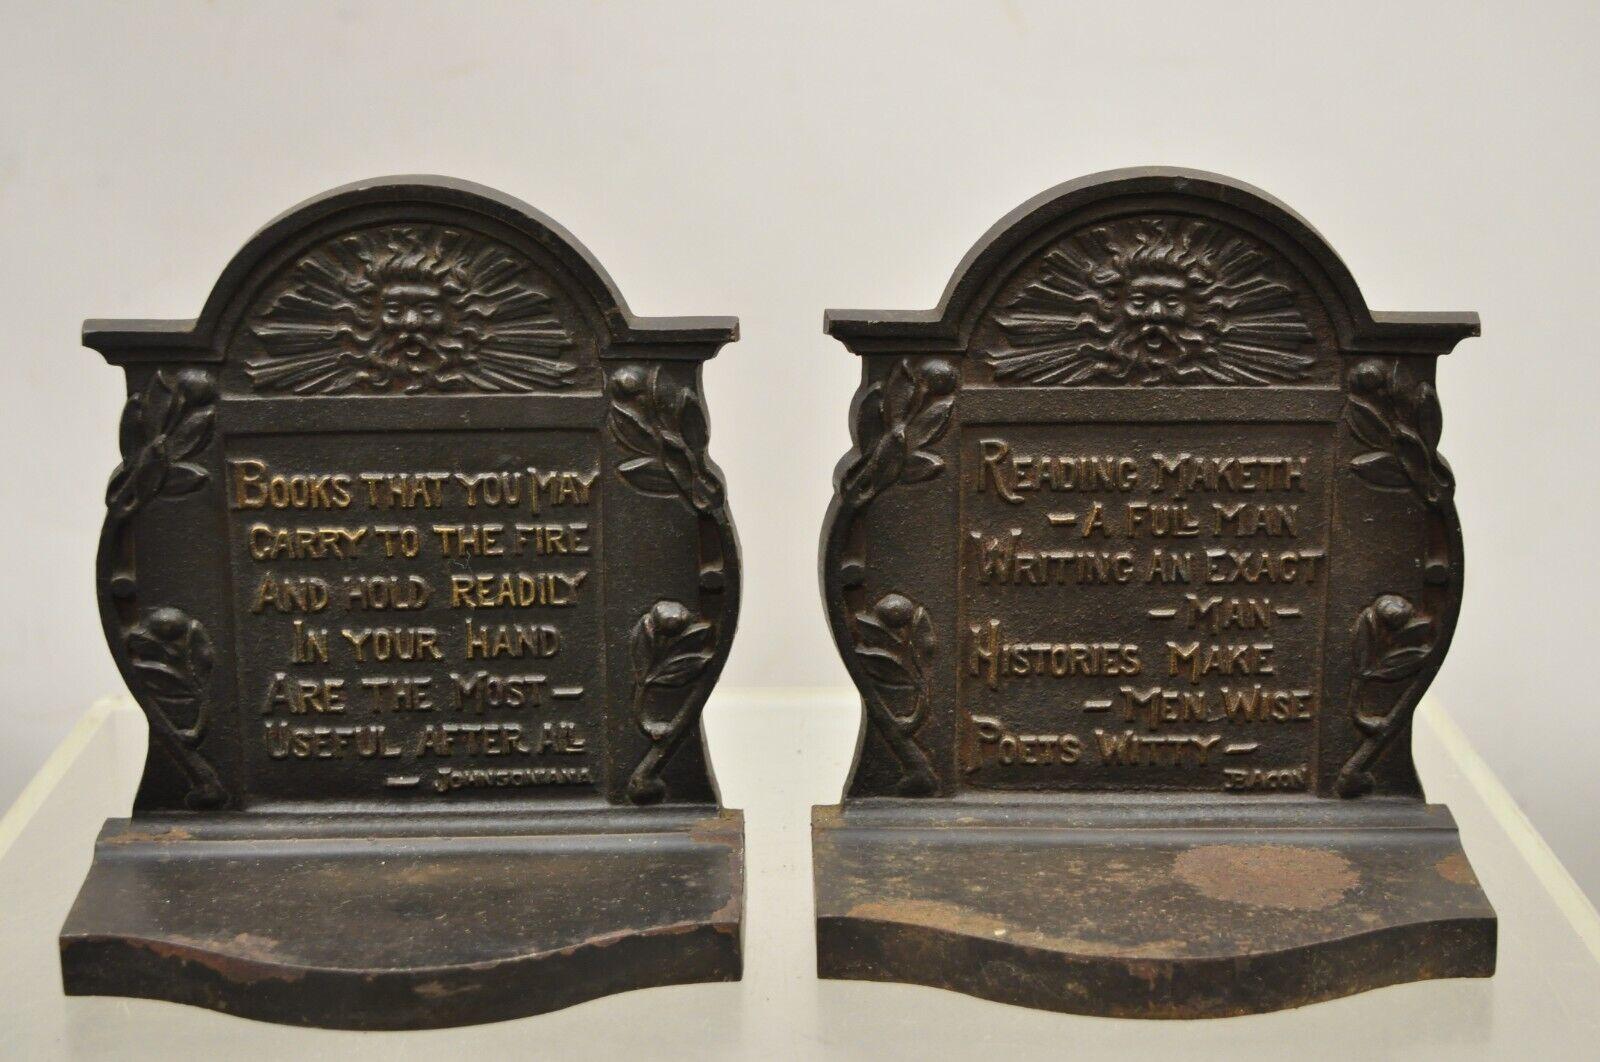 Antique Cast Iron Art Nouveau Johnsonsoniana and Bacon quote Bookends. Quotes read: Number 1 “Books that you may carry to the fire and hold readily in your hand are the most useful after all.” Number 2: “Reading maketh a full man writing an exact